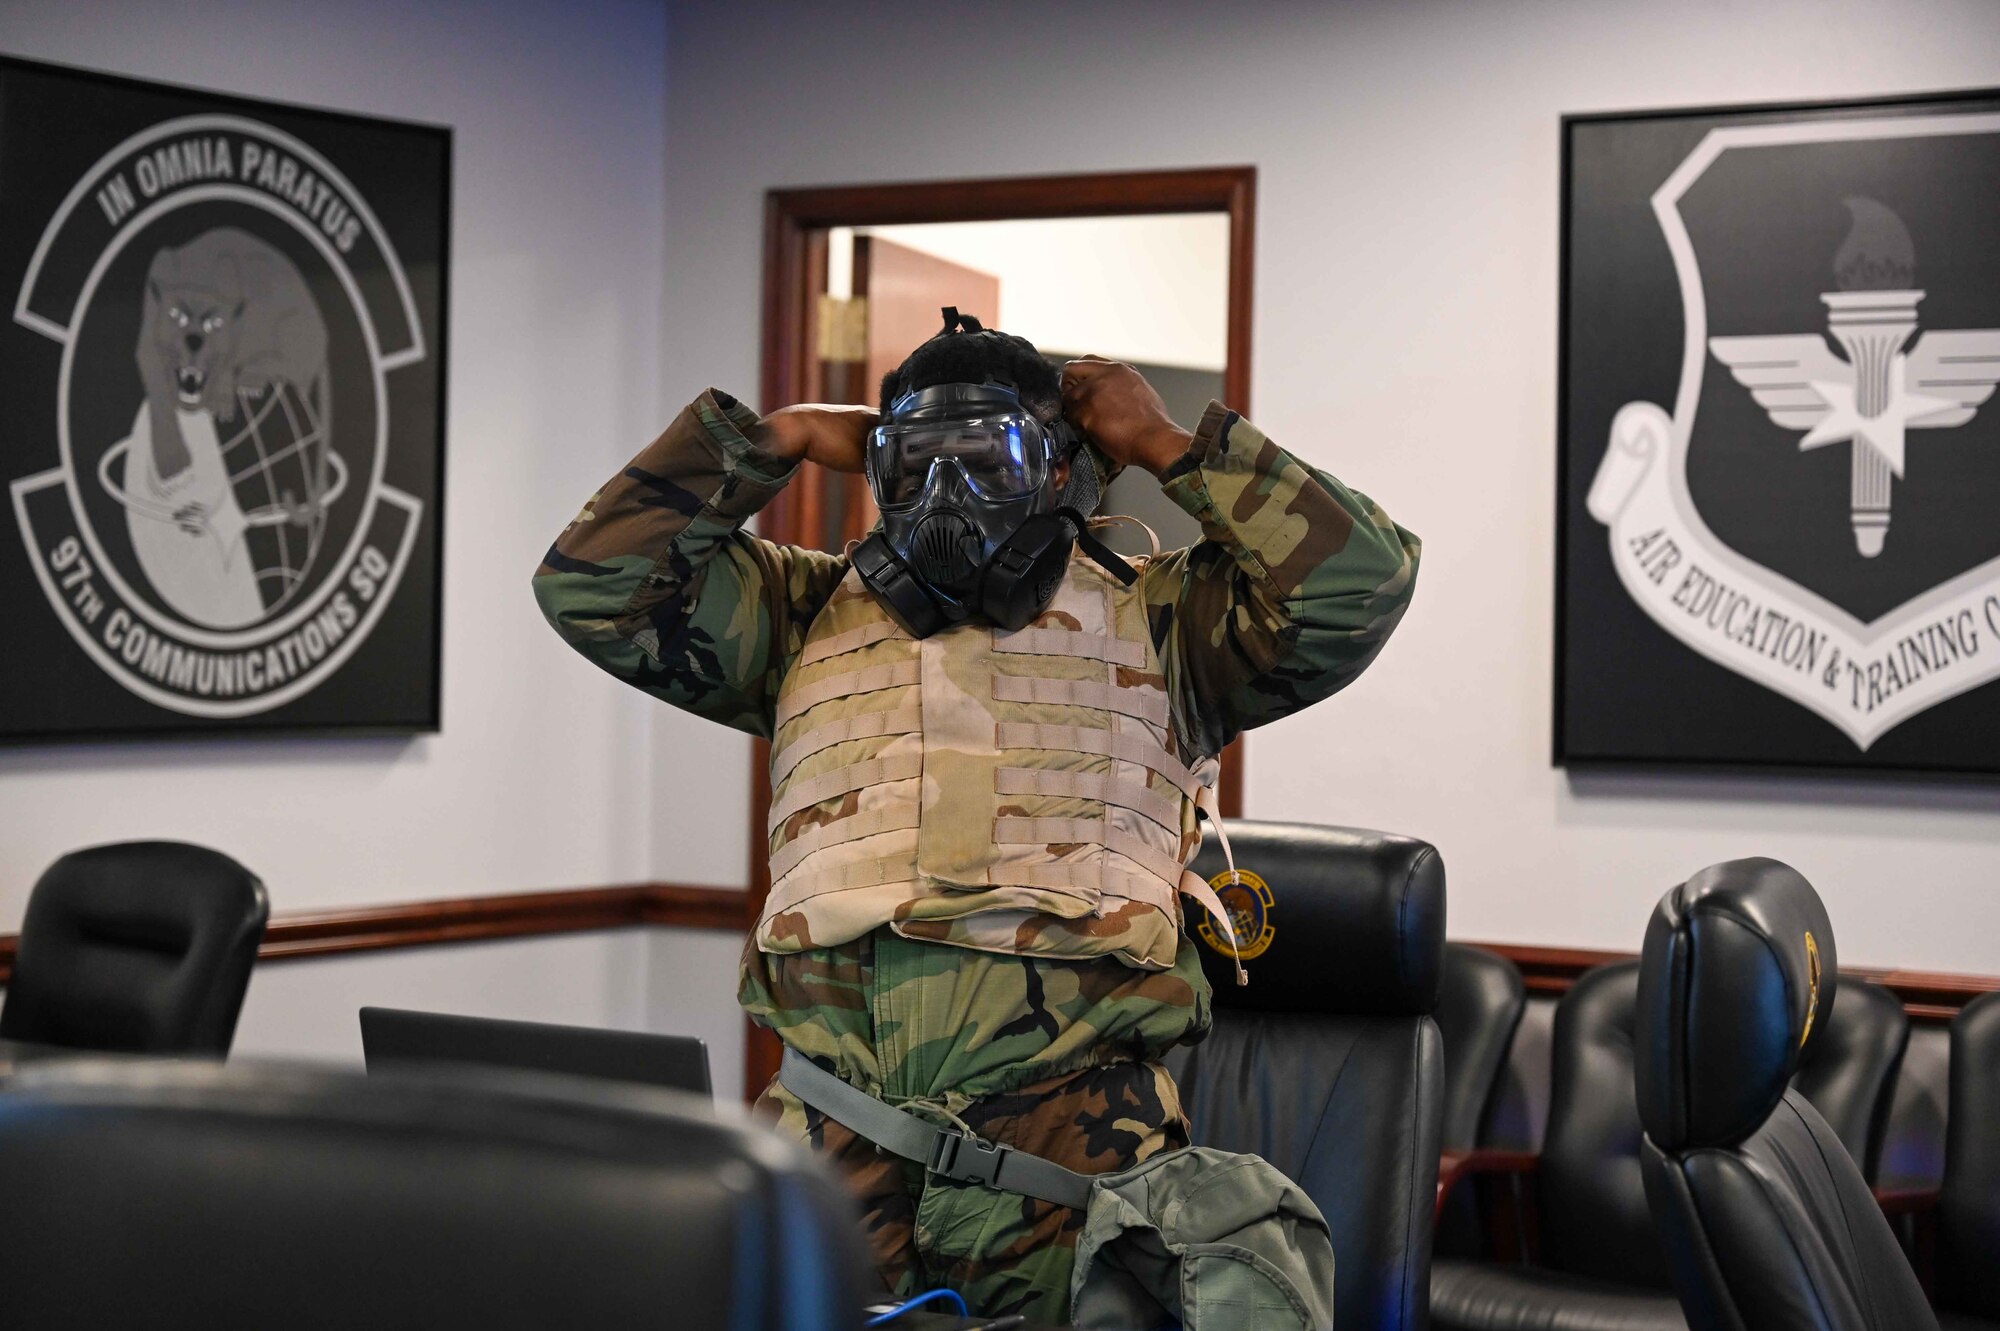 U.S. Air Force Tech. Sgt. Tristan Bradsher, 97th Communications Squadron (CS)noncommissioned officer in charge of wing cyber security, puts his mask on for mission-oriented protective posture (MOPP) level three at Altus Air Force Base, Oklahoma, Feb. 23, 2023. MOPP gear is used to prepare for chemical, biological, radiological and nuclear attacks. (U.S. Air Force photo by Airman 1st Class Kari Degraffenreed)